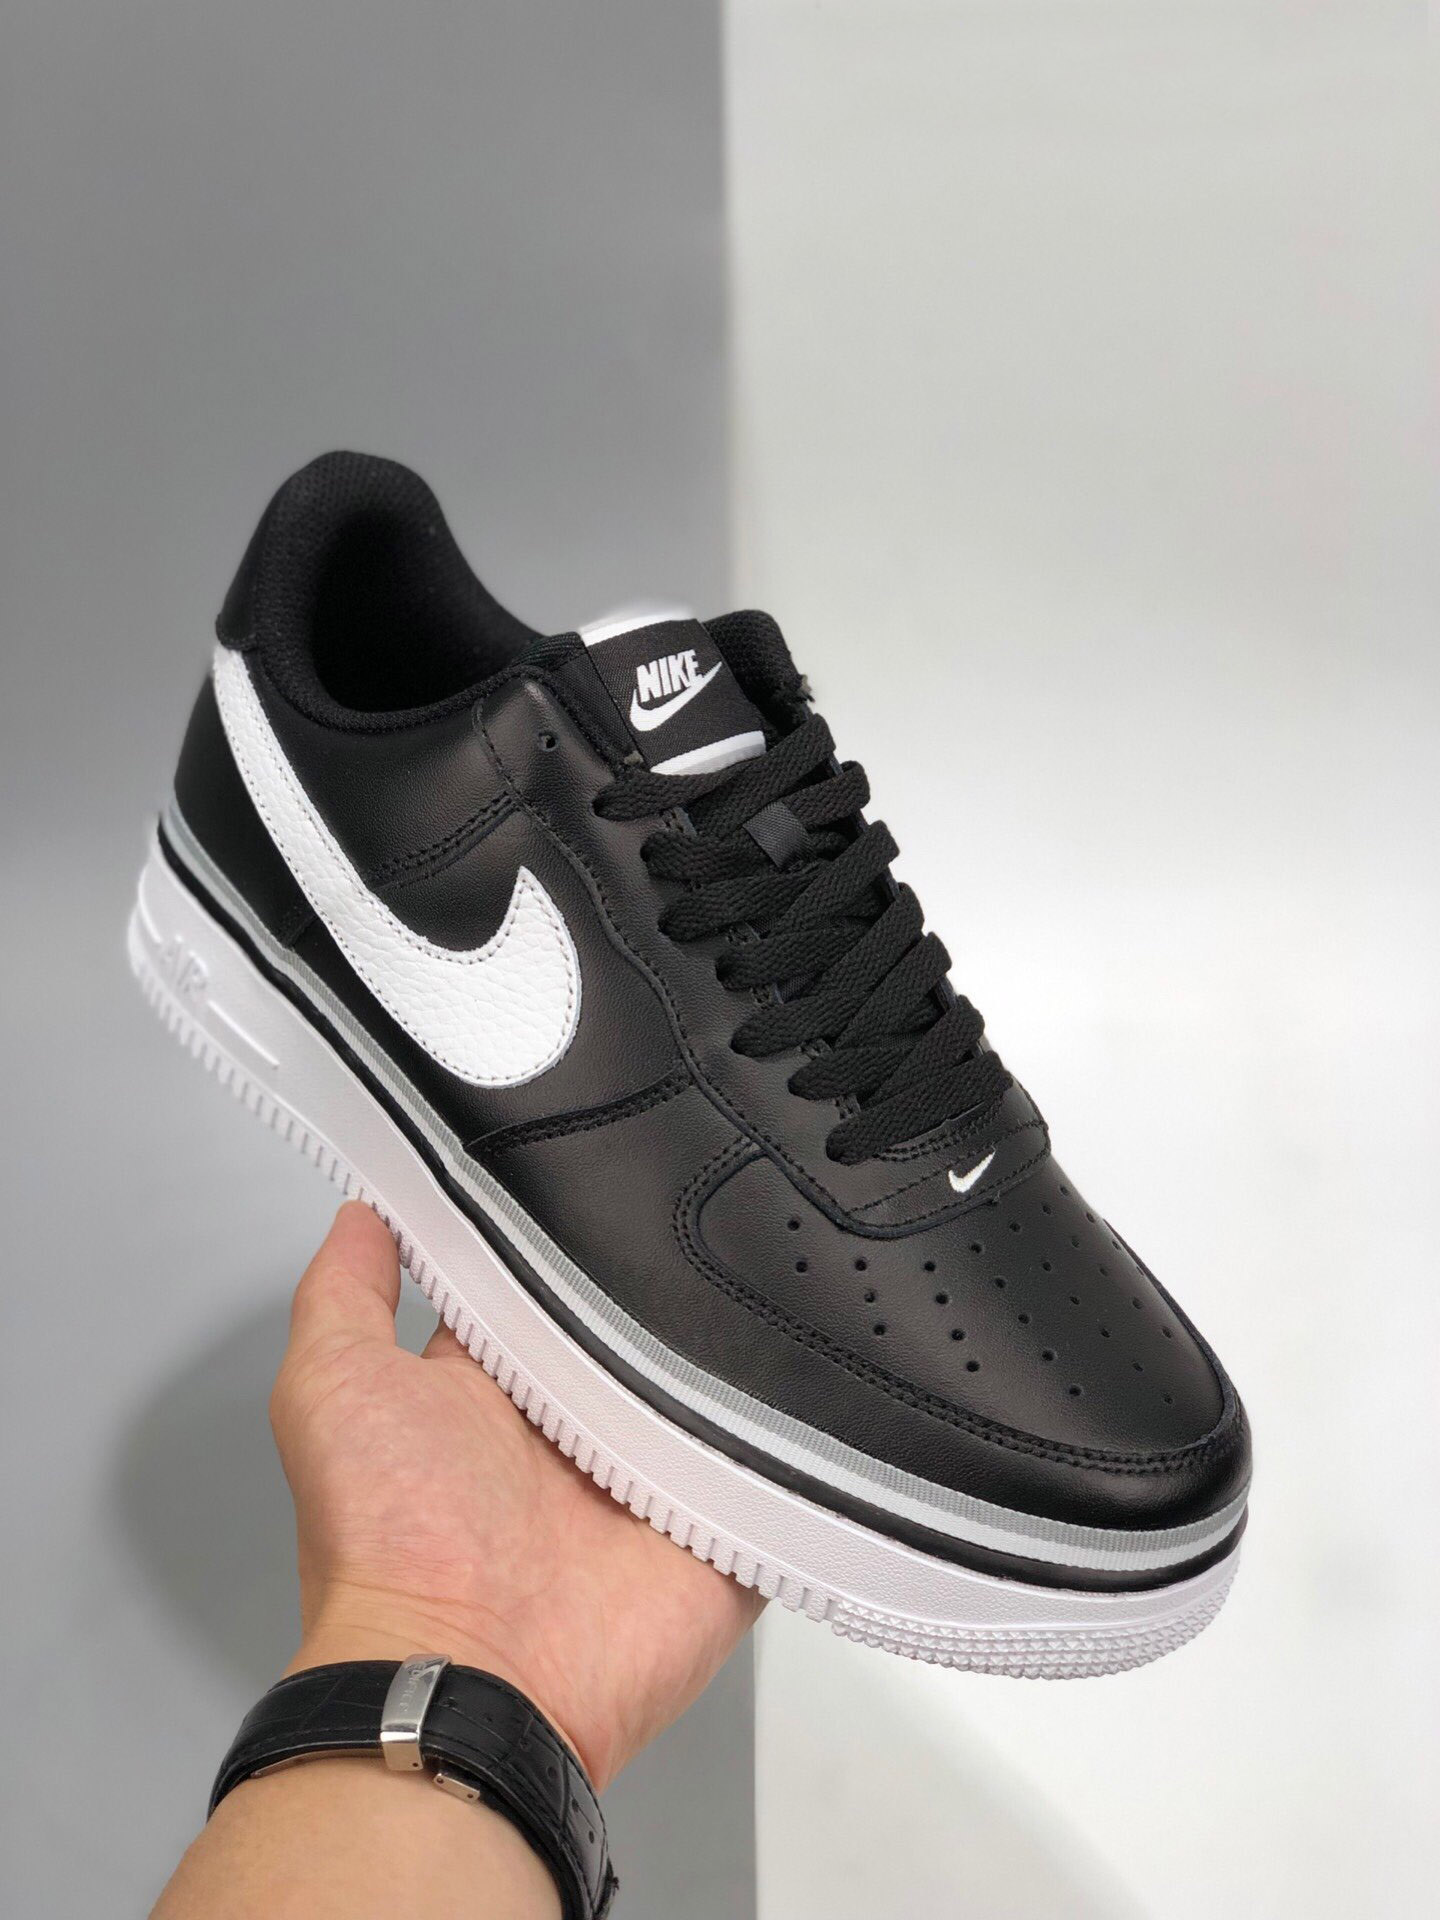 Nike Air AF Force 1 Low 'Ribbon' Black White CT1621-001 Shoes